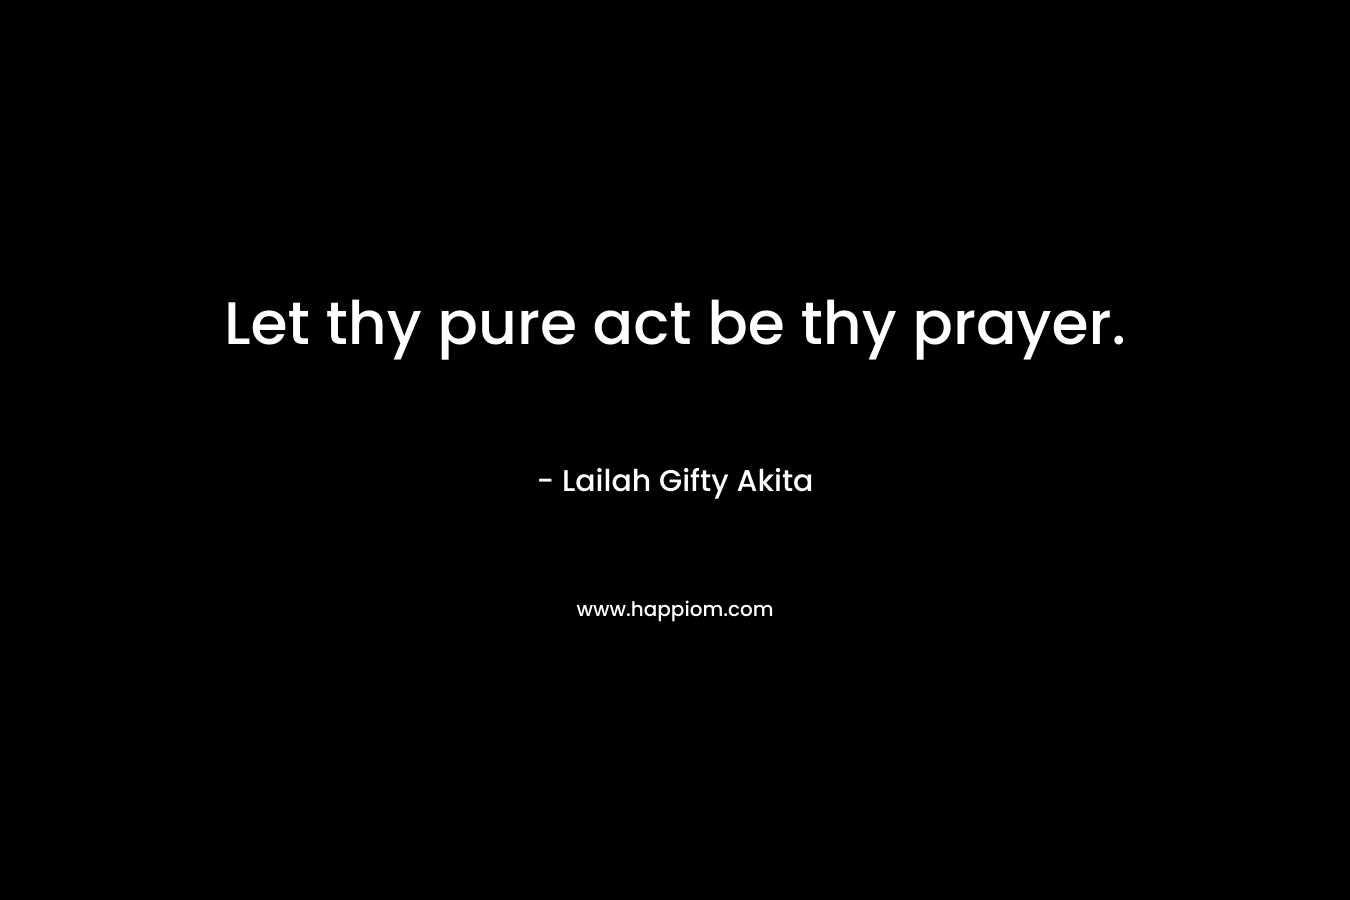 Let thy pure act be thy prayer.